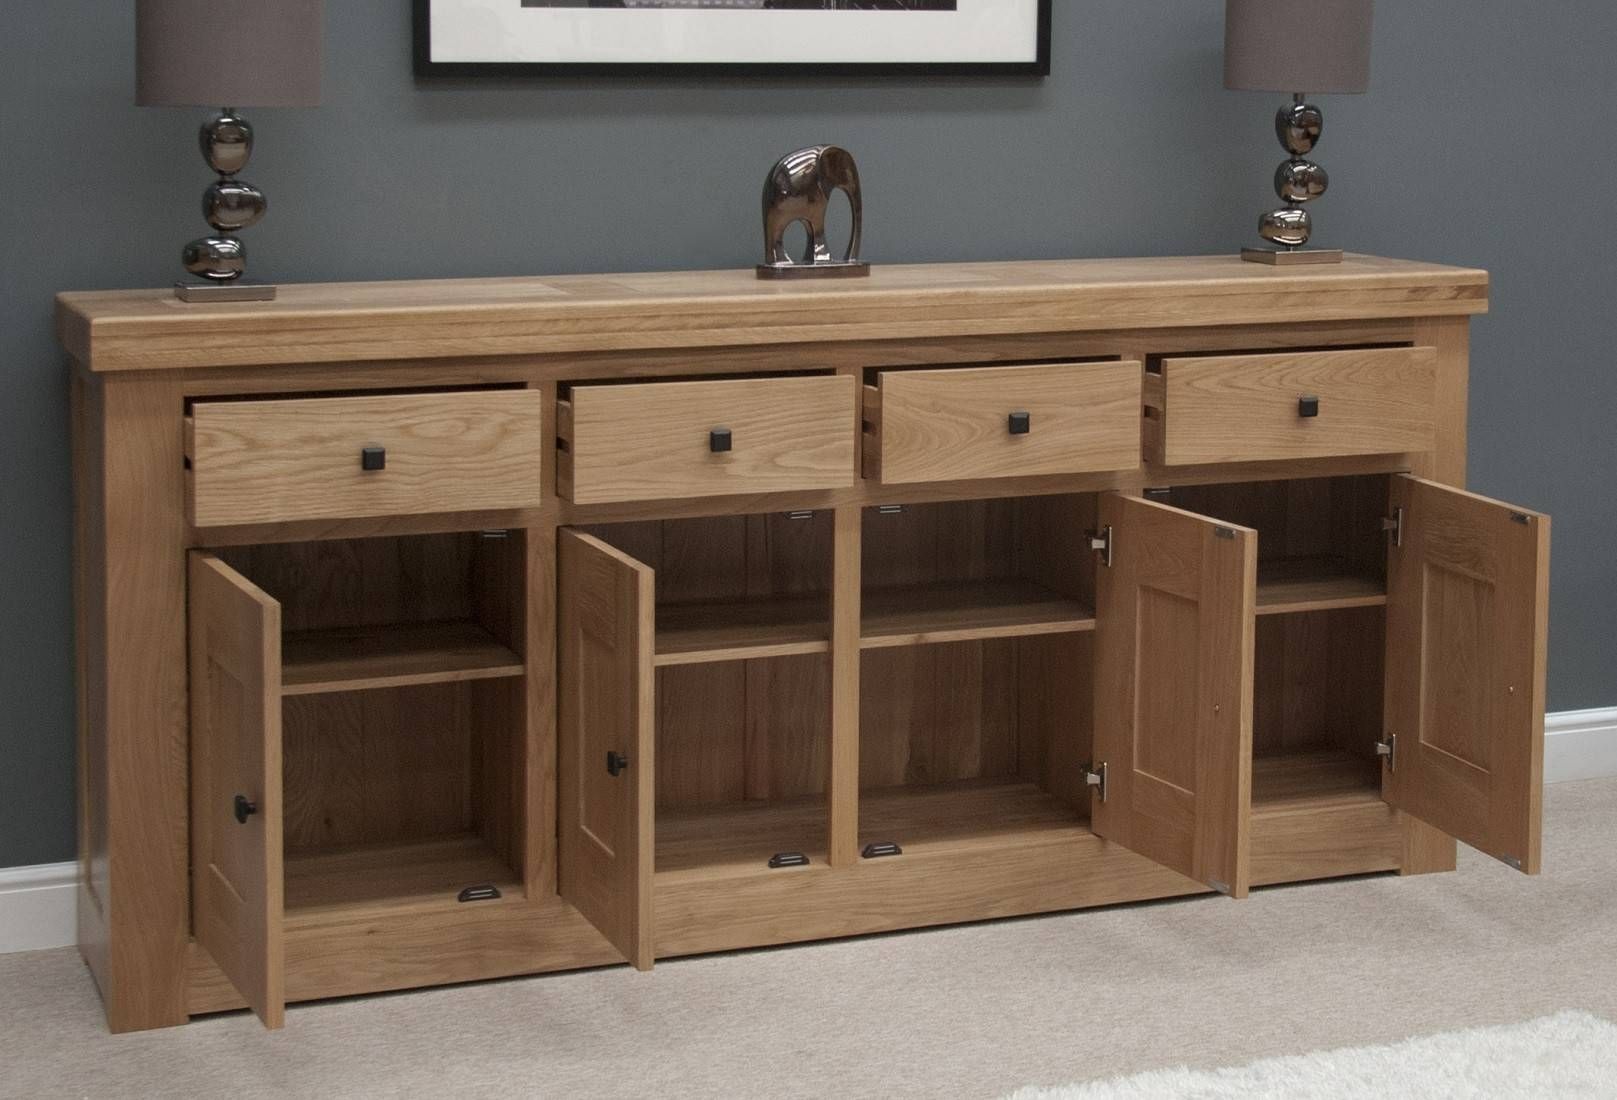 French Bordeaux Oak Extra Large 4 Door Sideboard | Oak Furniture Uk With Regard To Wooden Sideboards (View 2 of 15)